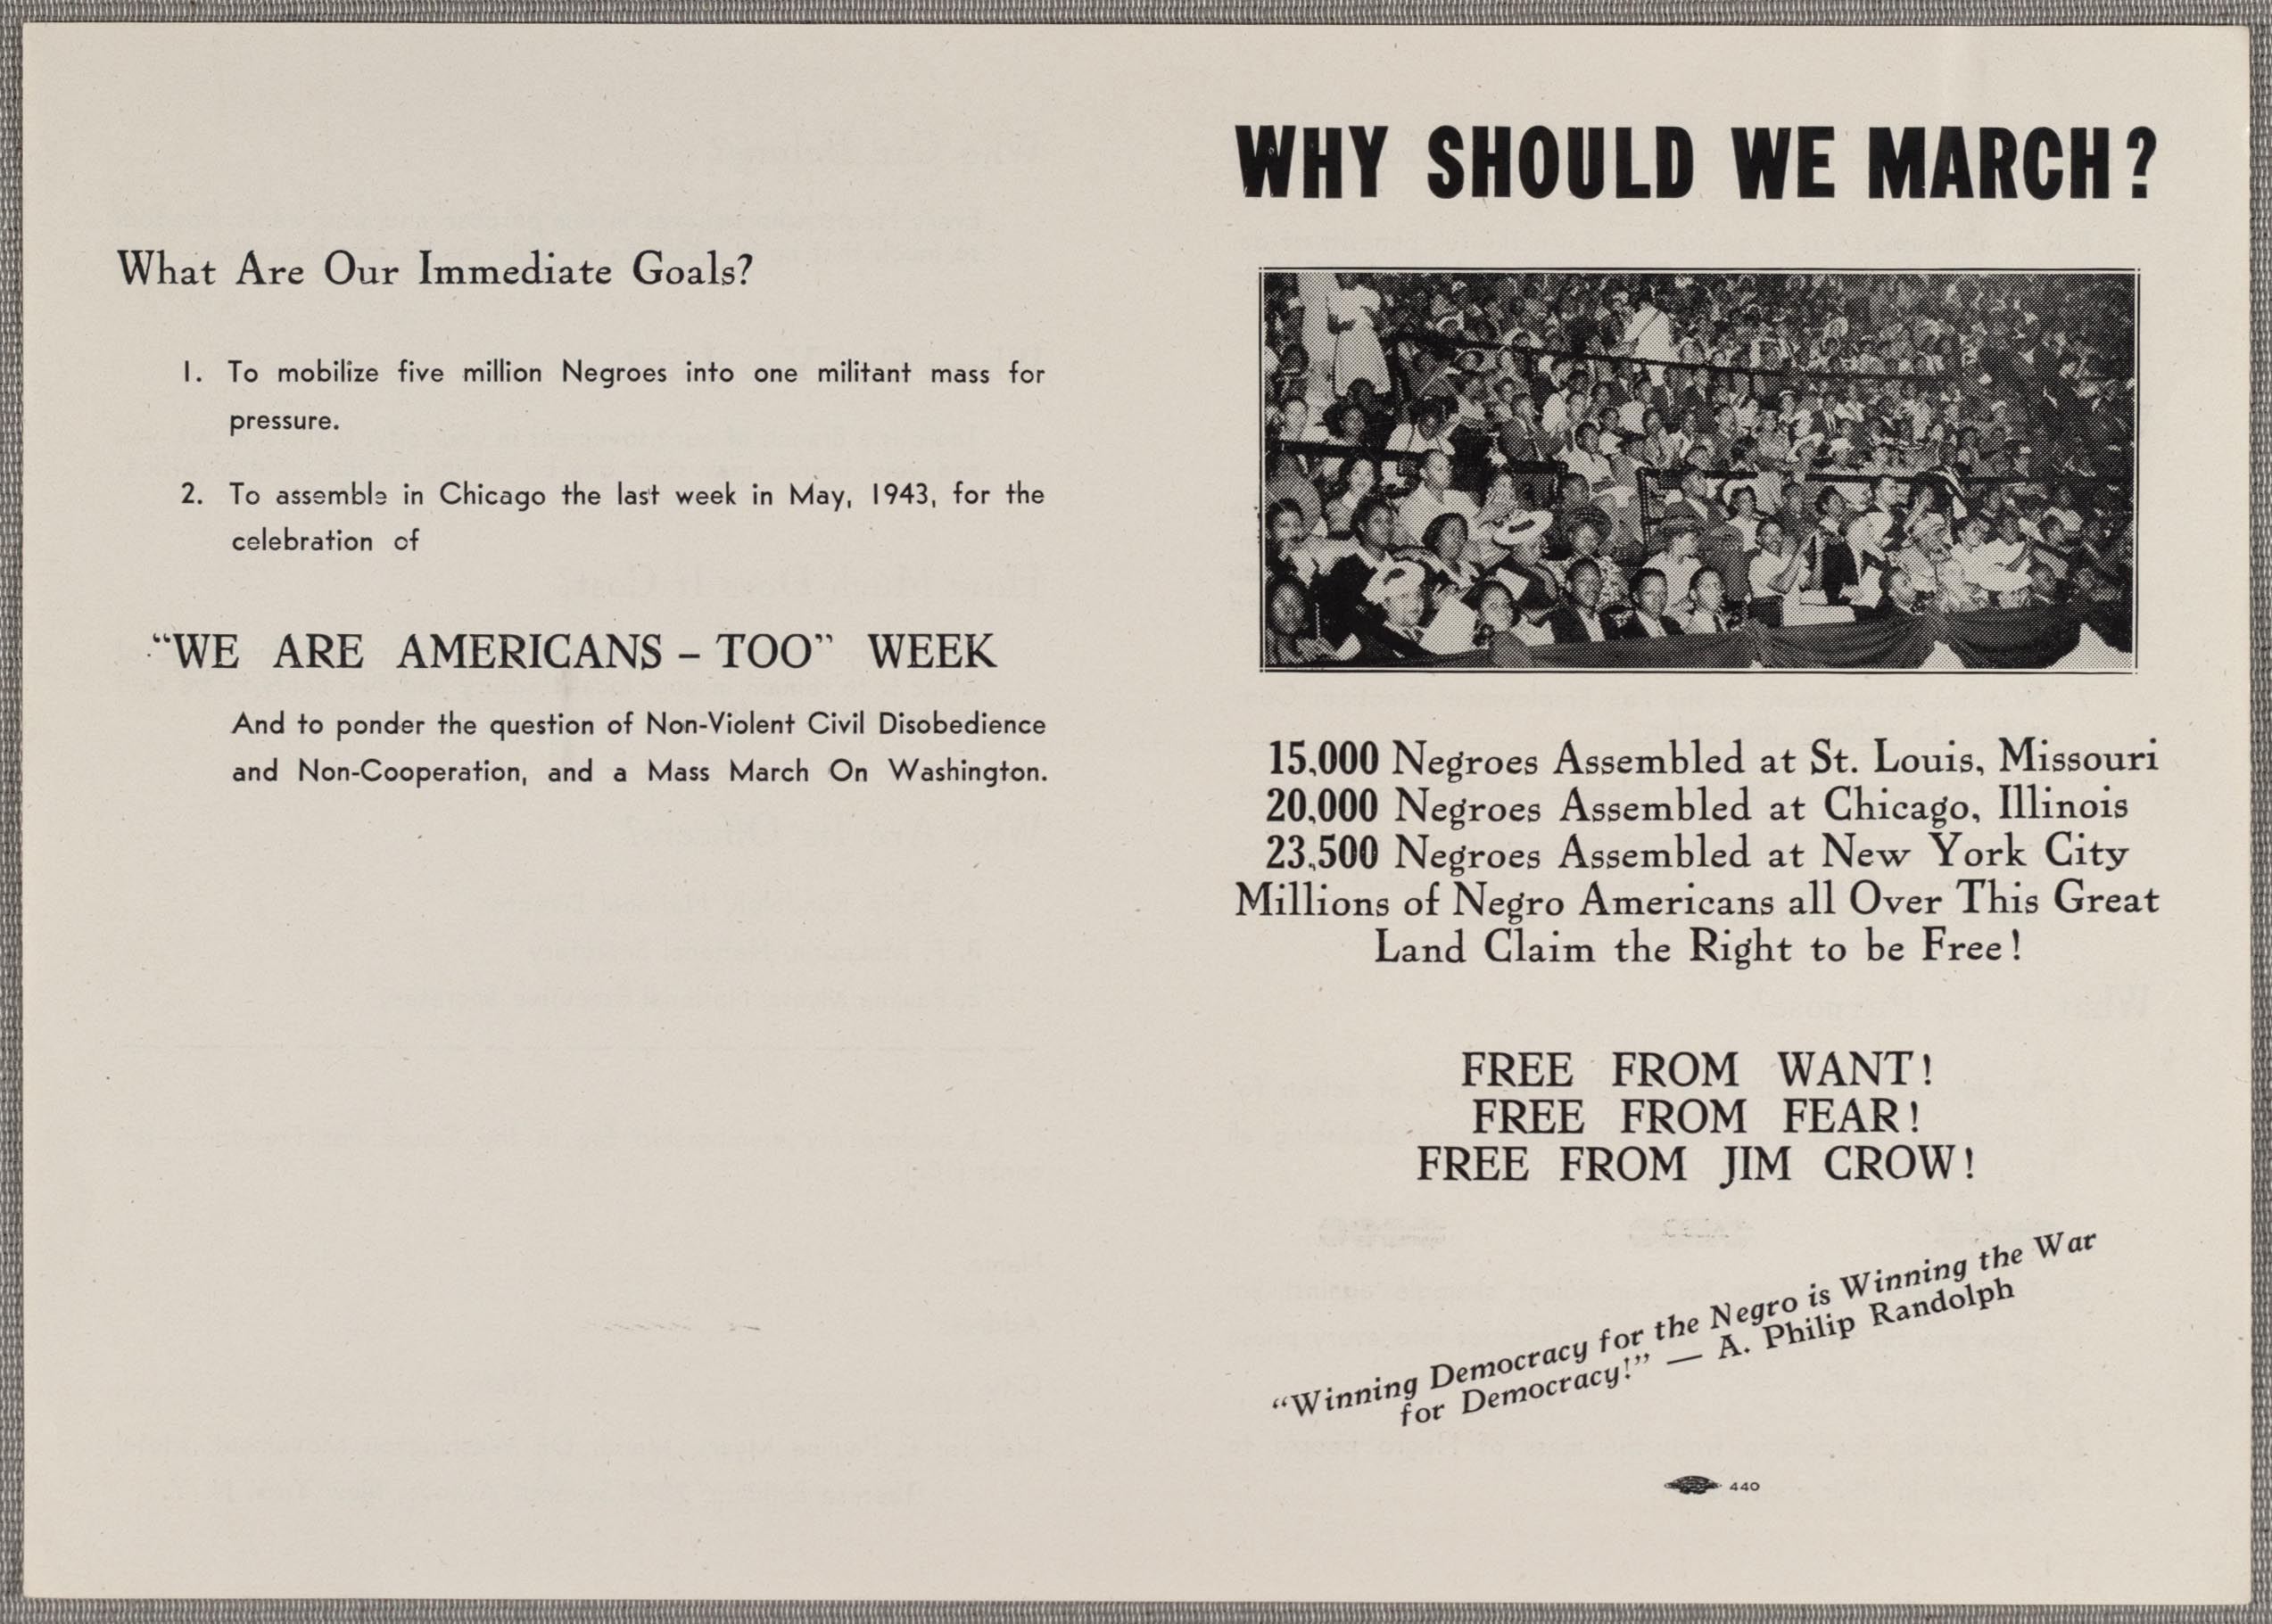 Pamphlet with text about planned civil rights march.